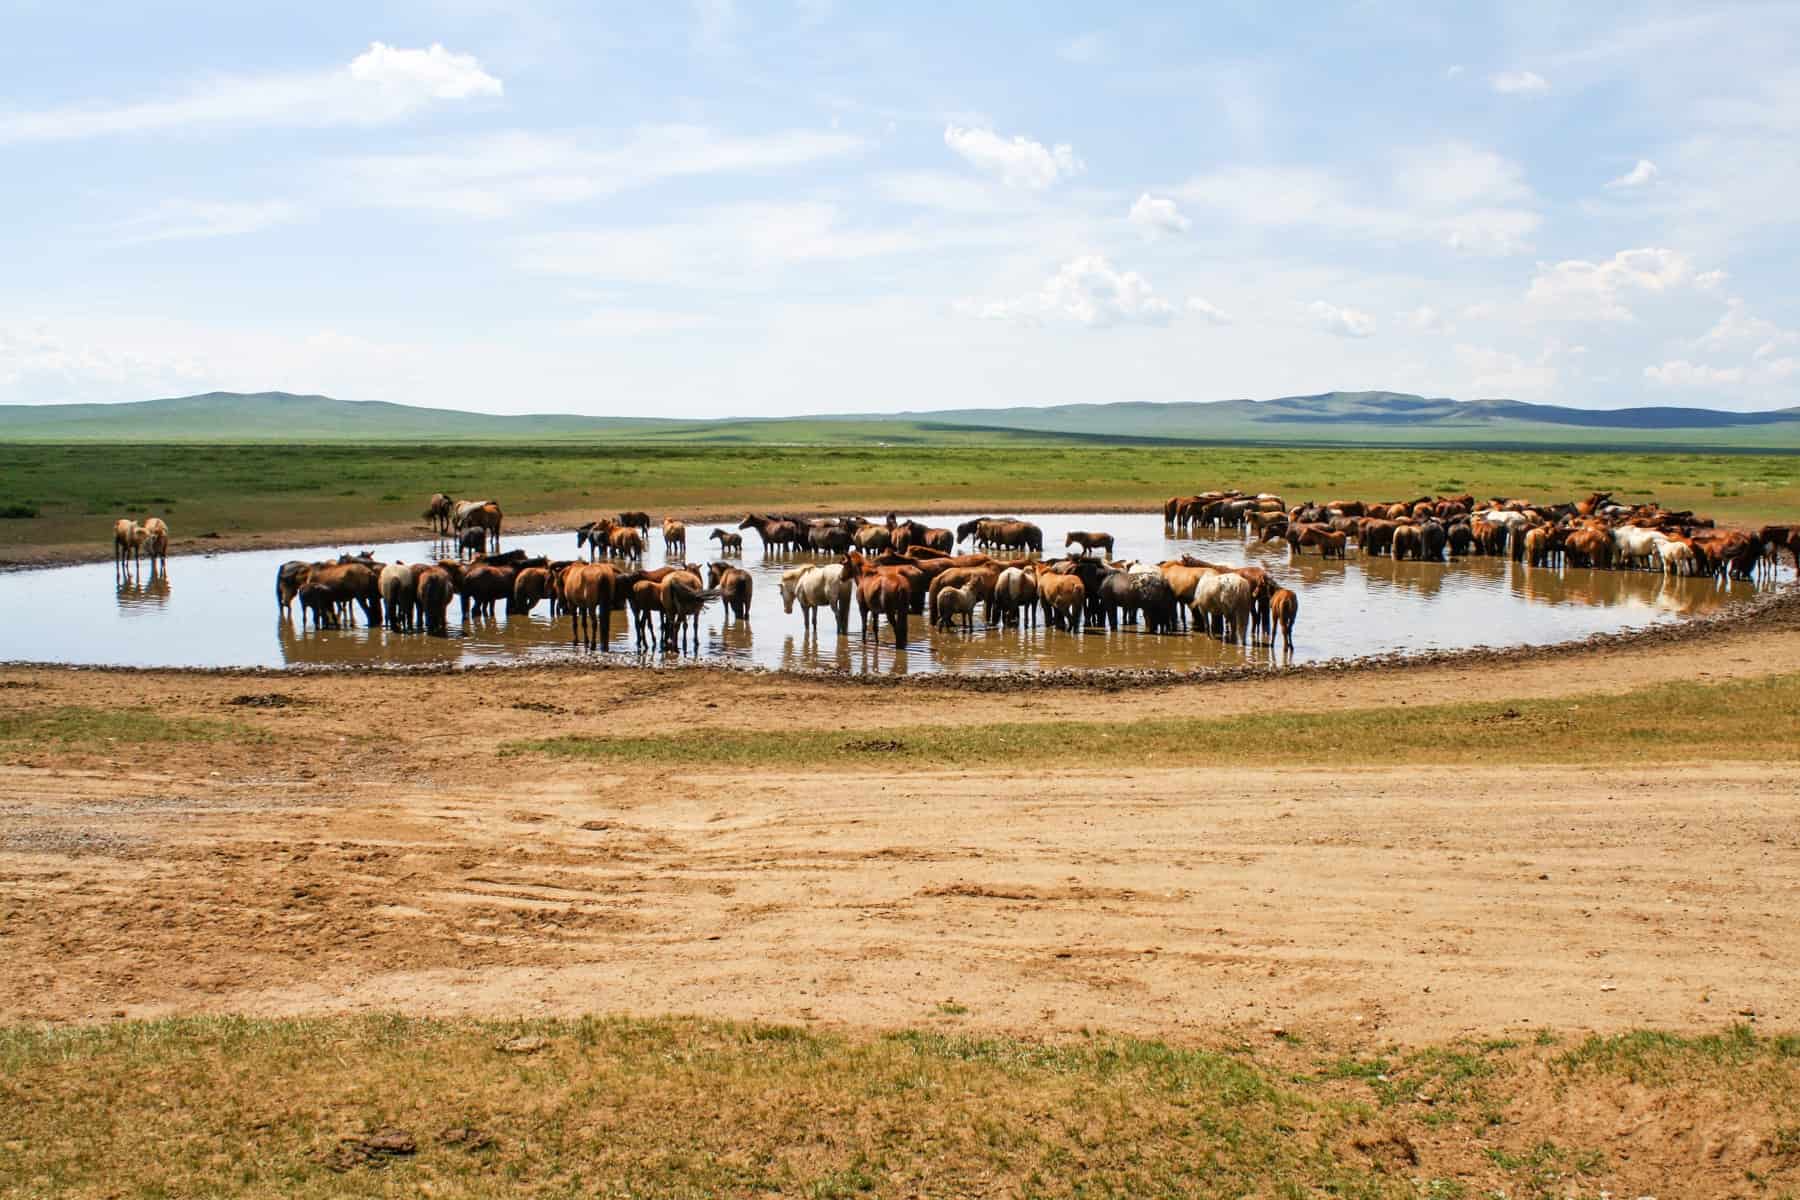 Wild horses in the Mongolian flat, barren landscape drinking from a small pool of water